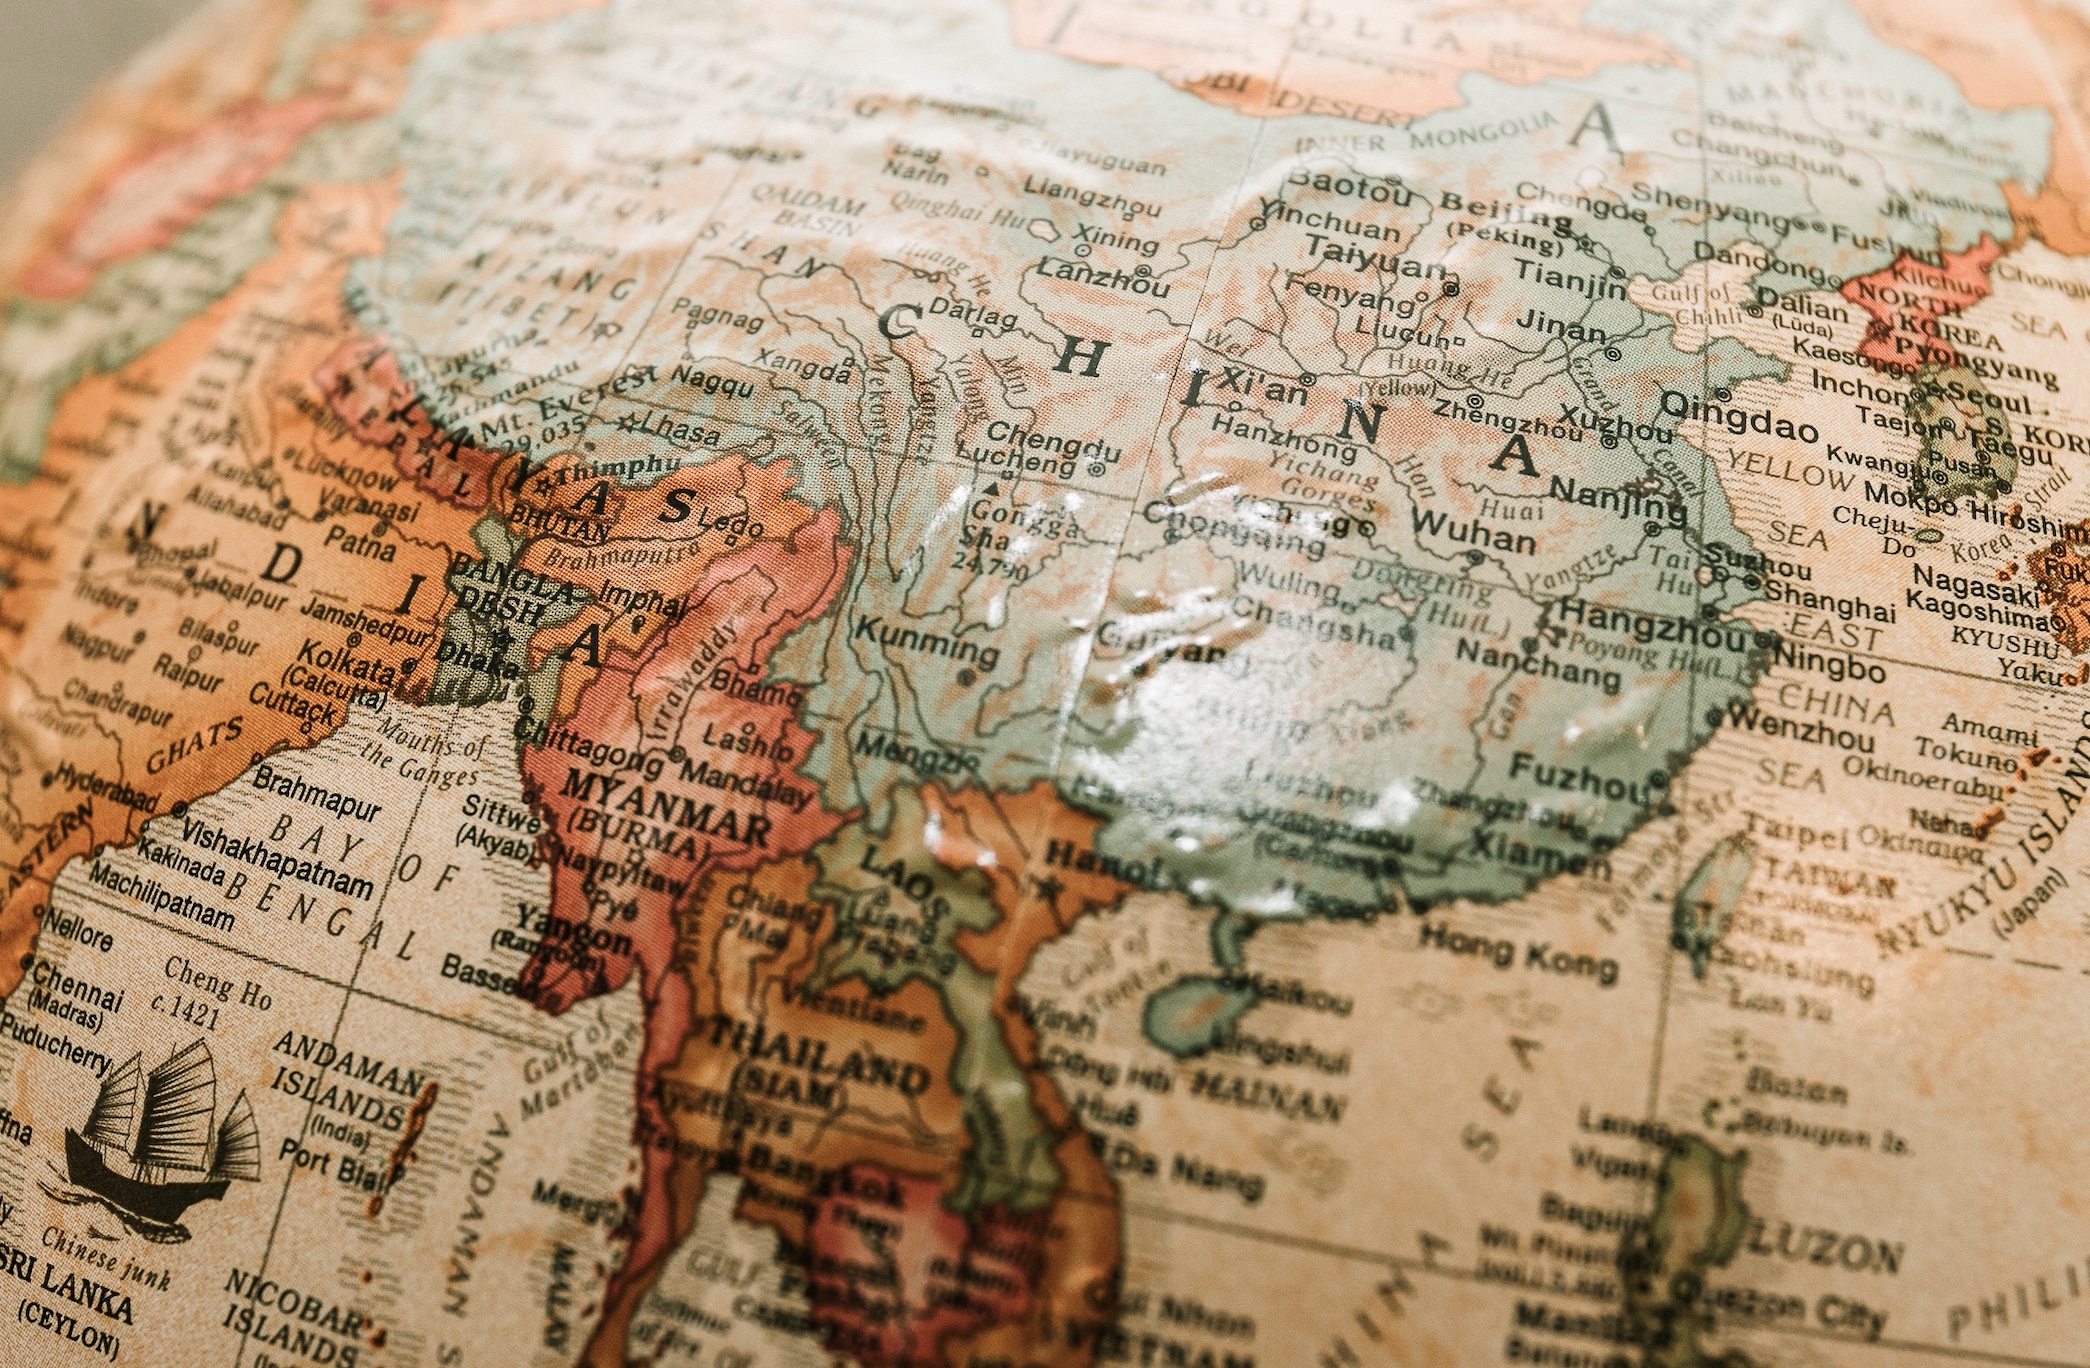 Close-up of globe showing India and China; image by James Coleman, via Unsplash.com.